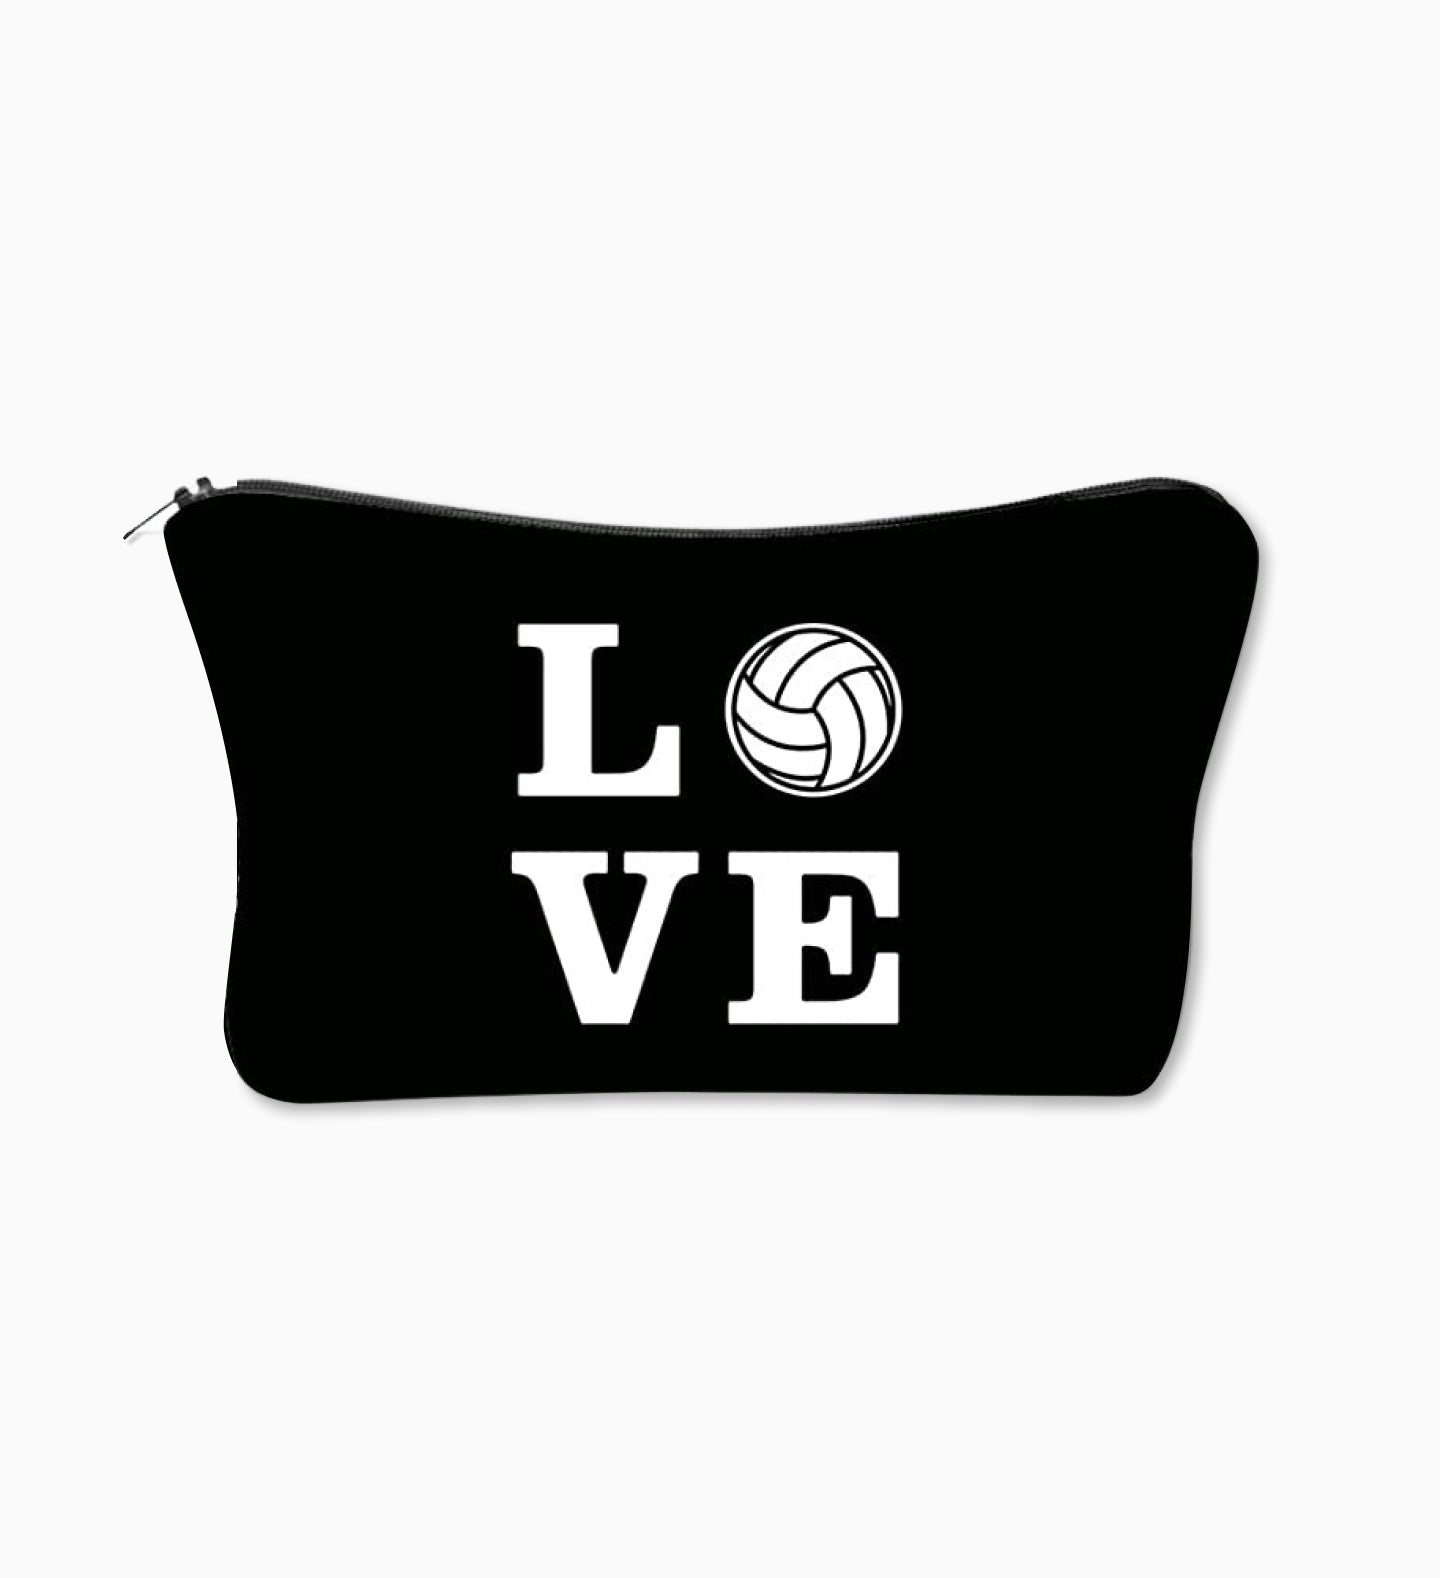 Volleyball Travel/Toiletry/Cosmetic Bag